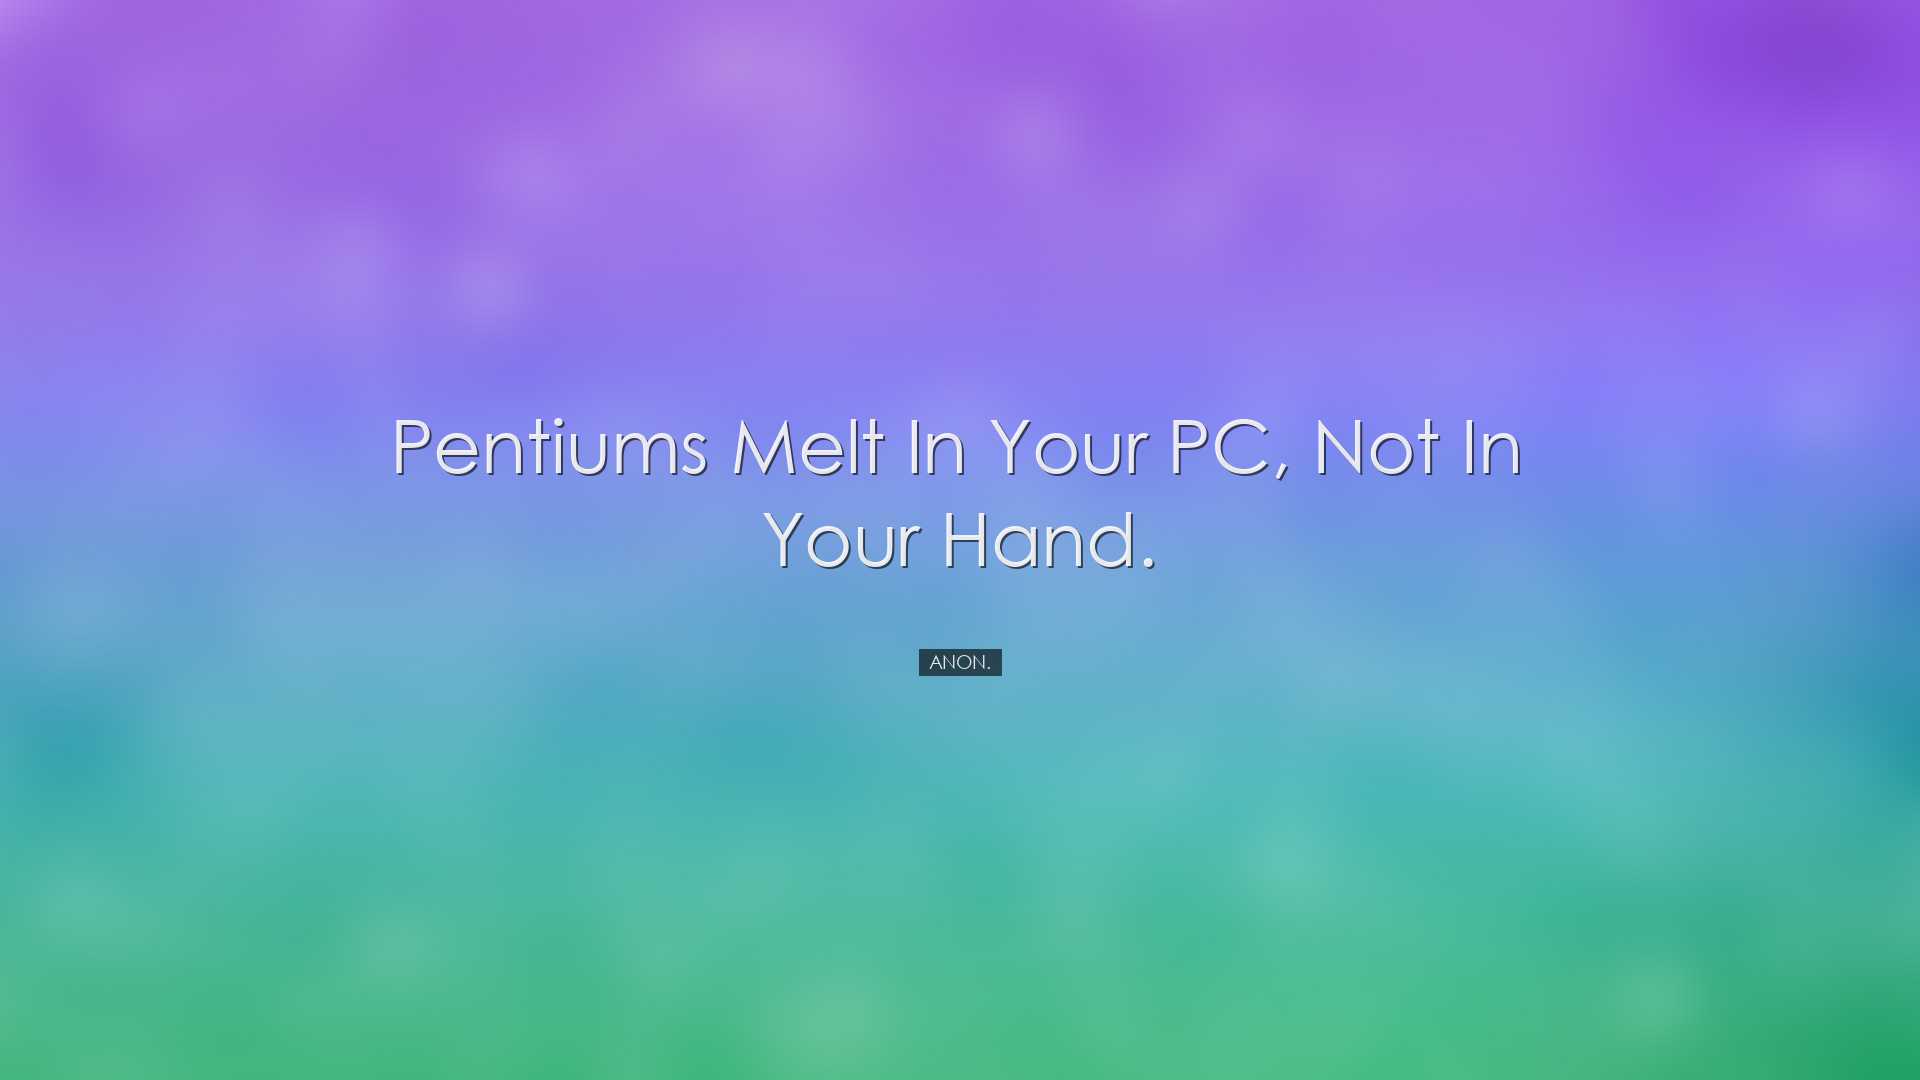 Pentiums melt in your PC, not in your hand. - Anon.